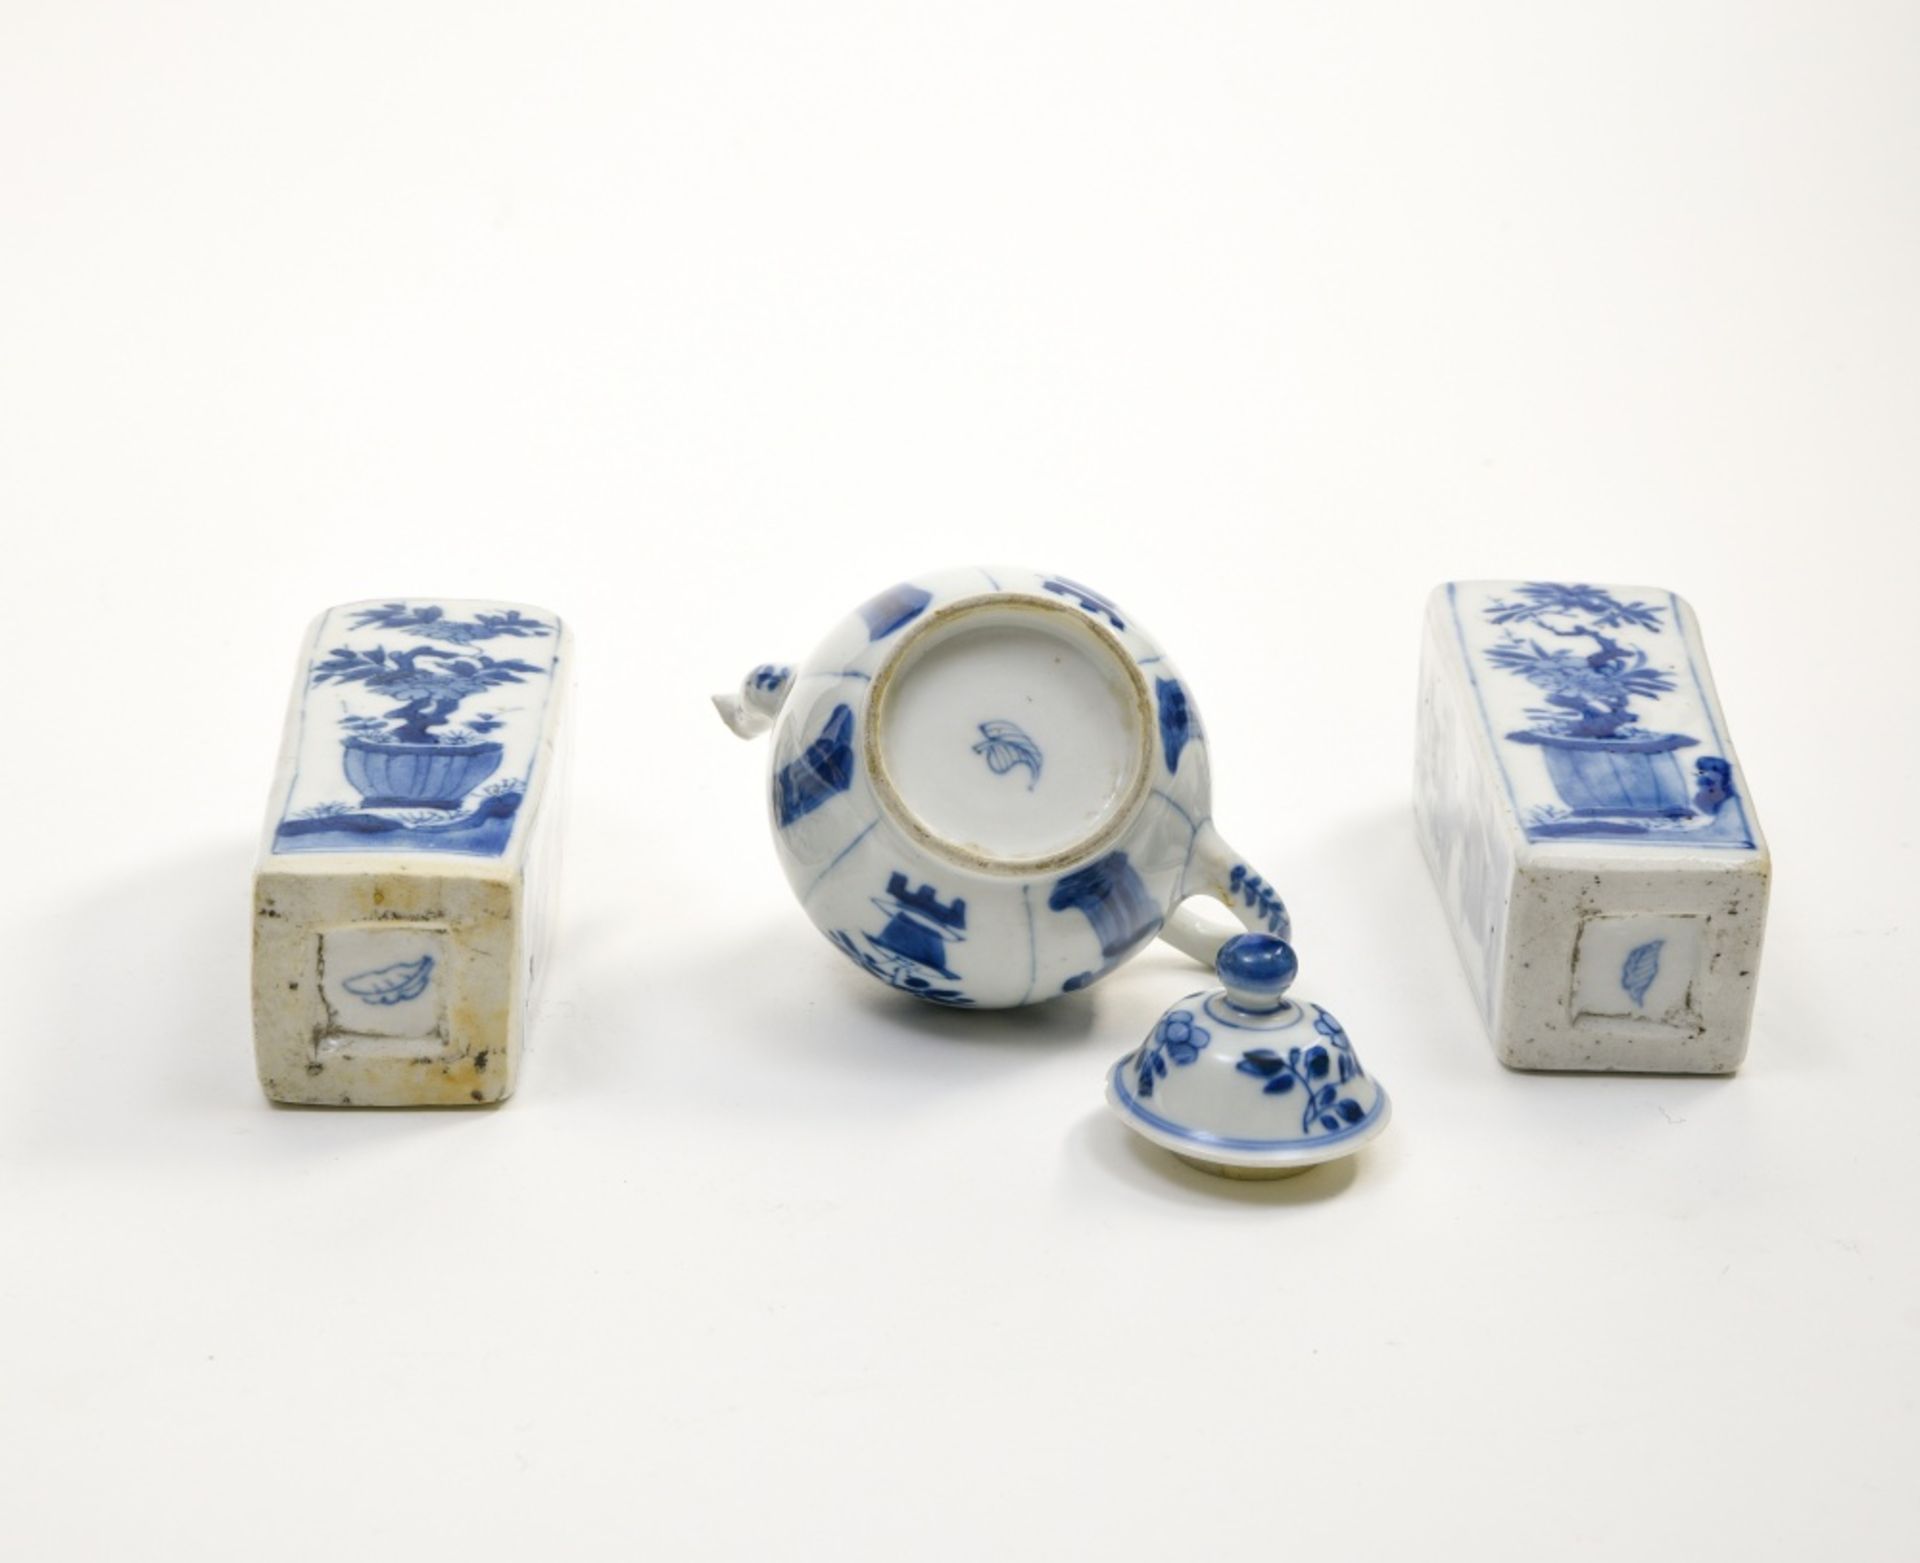 China, 18th century Two small bevelled vases and a teapot, Blue and white porcelain, with Kangxi - Image 2 of 2